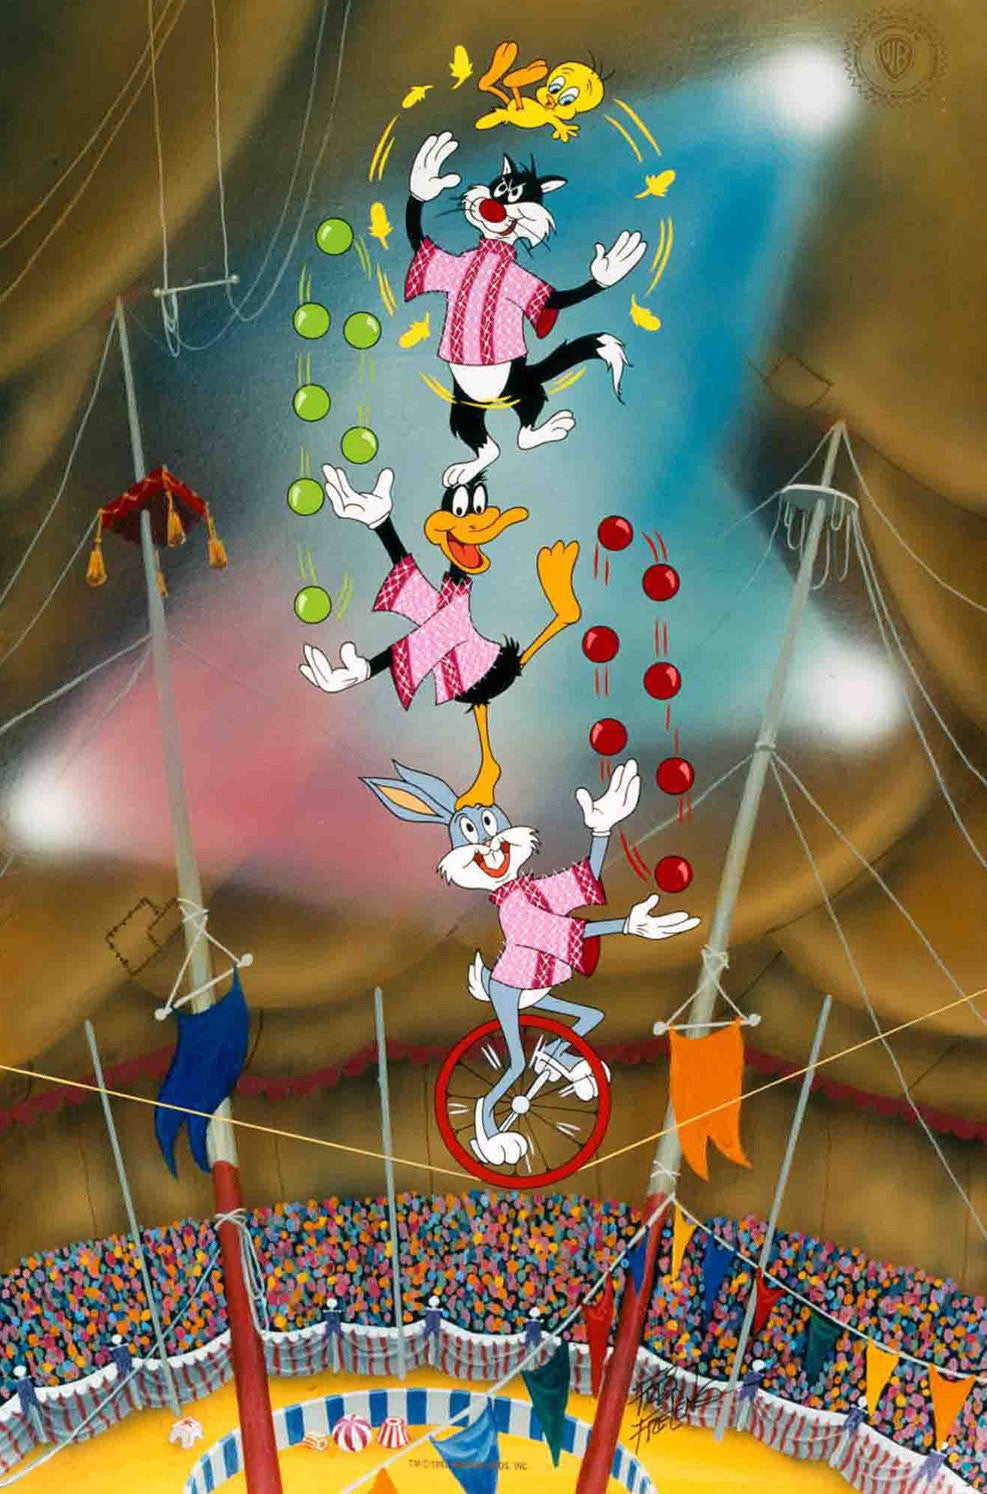 Features Tweety. Sylvester, Daffy, and Bugs in a acrobat circus act.